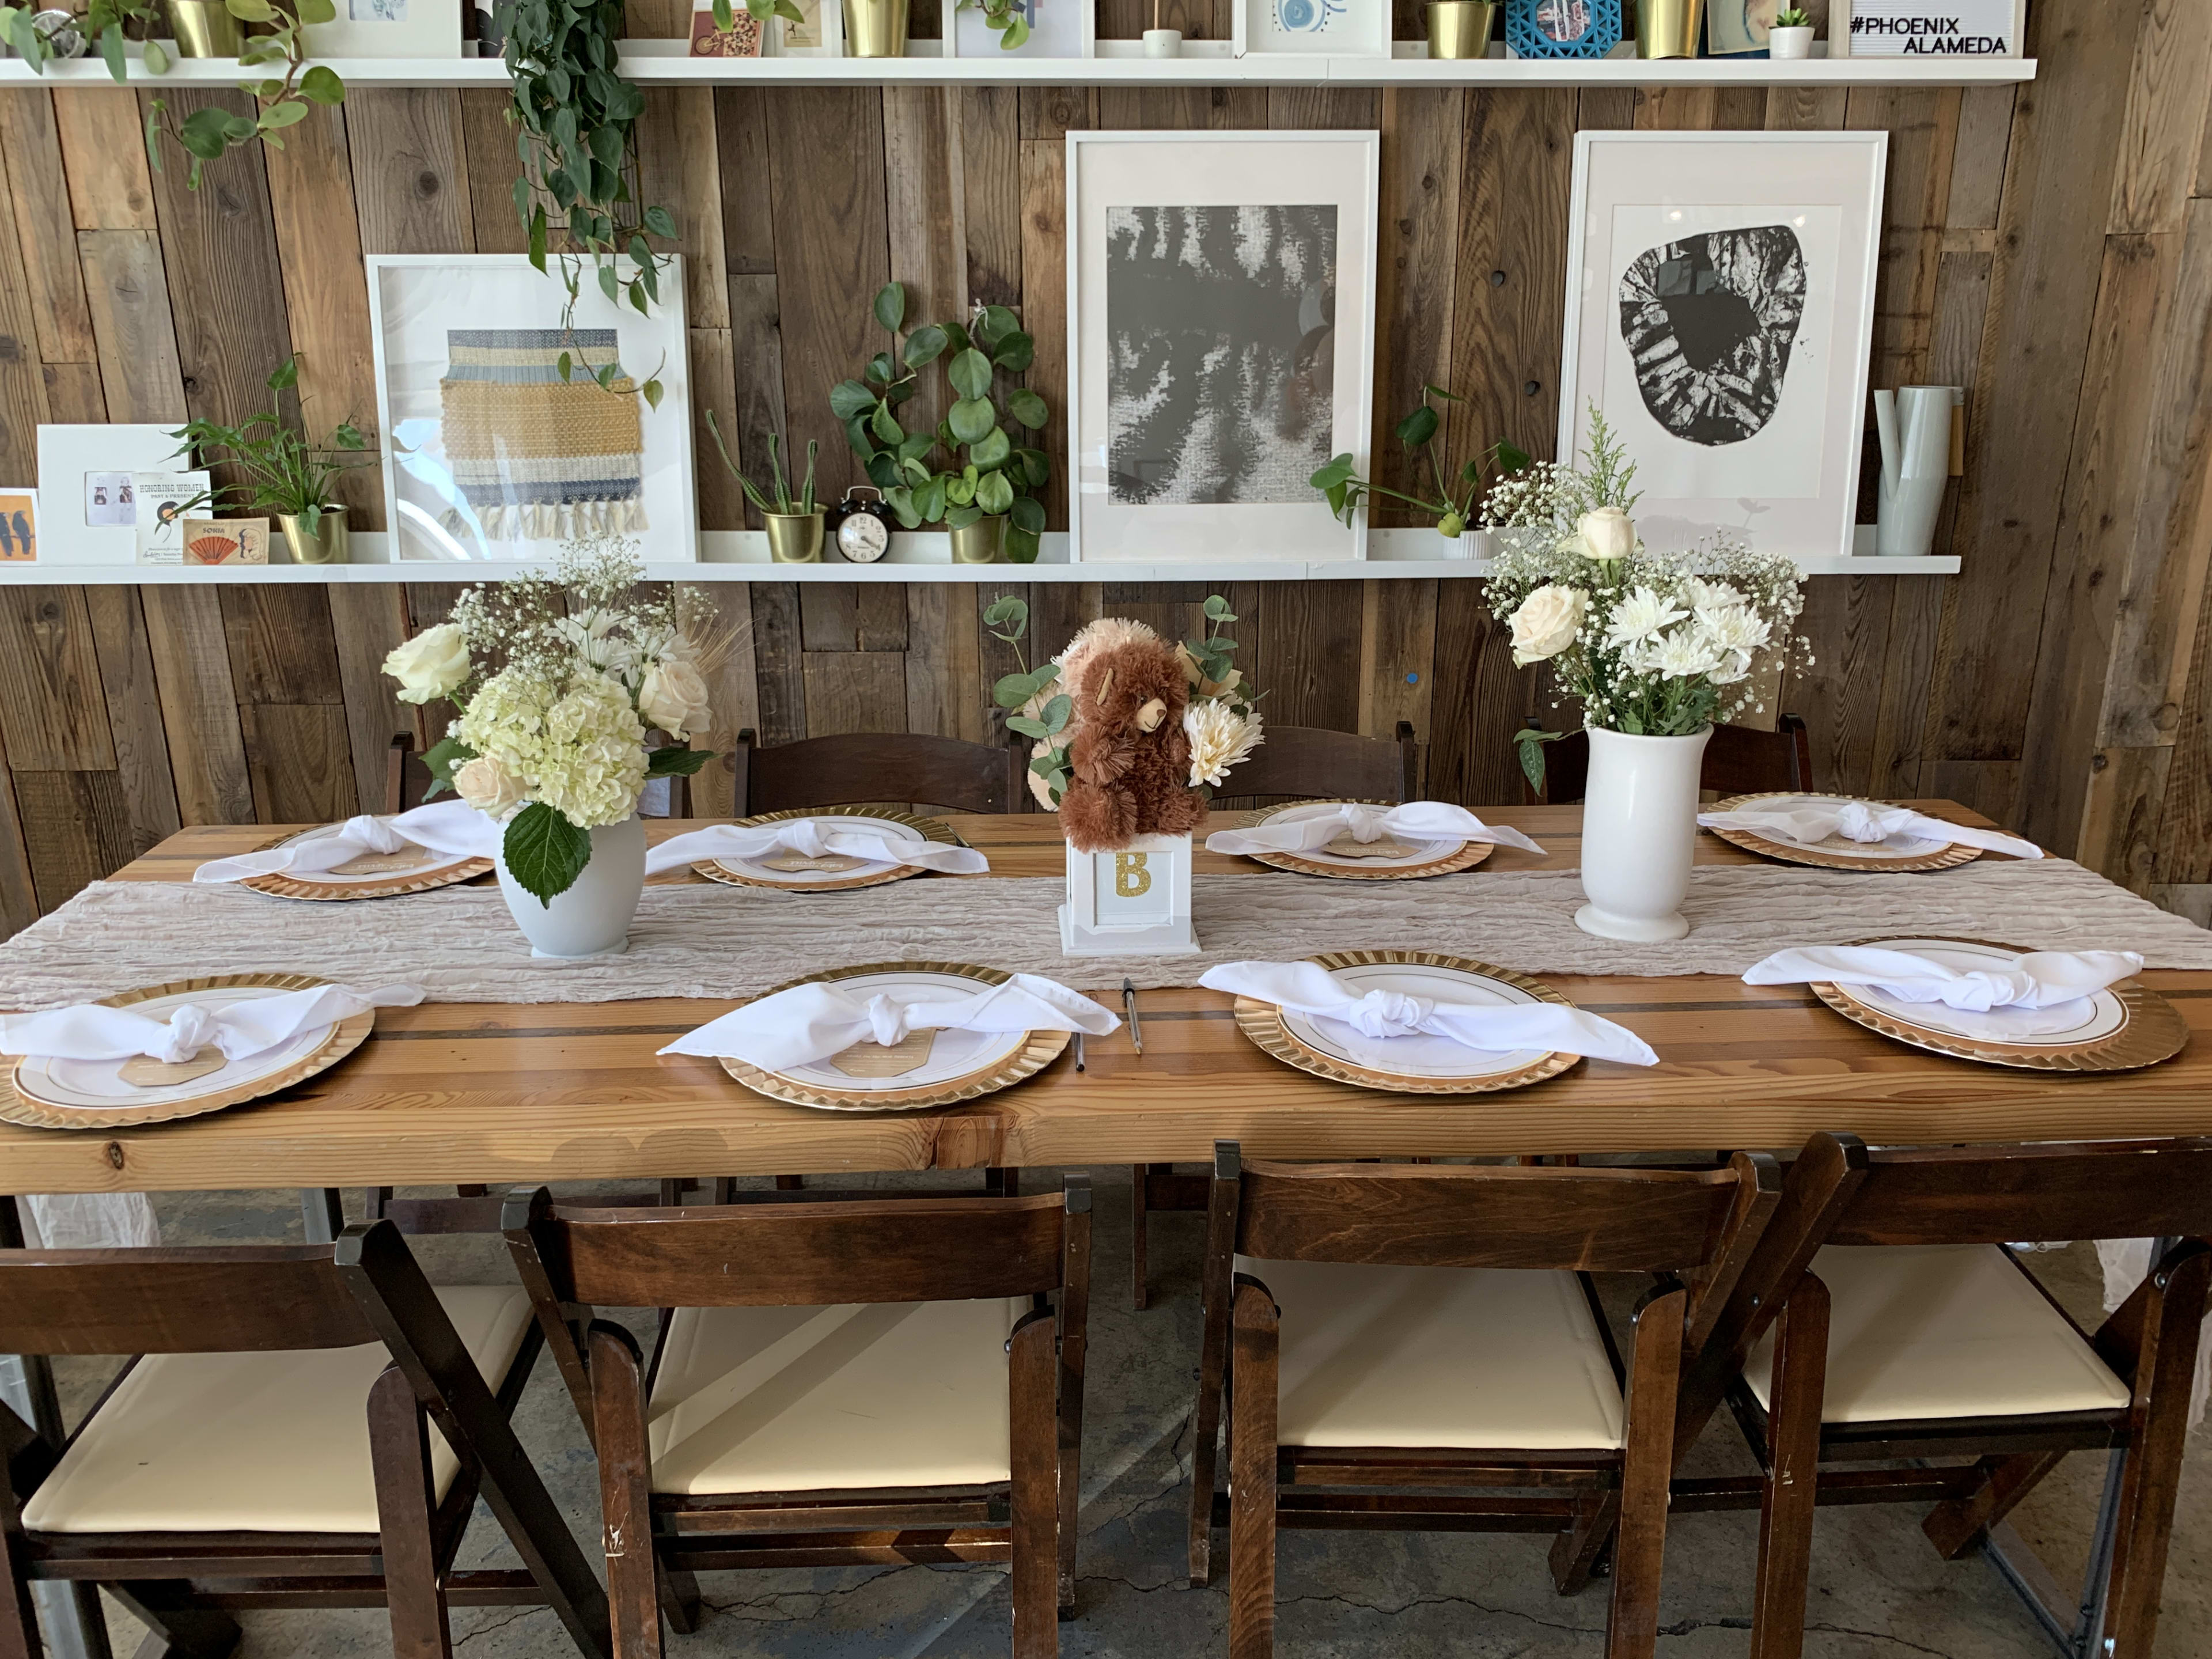 A rustic wooden table adorned with vases of flowers for a gender-neutral baby shower brunch.